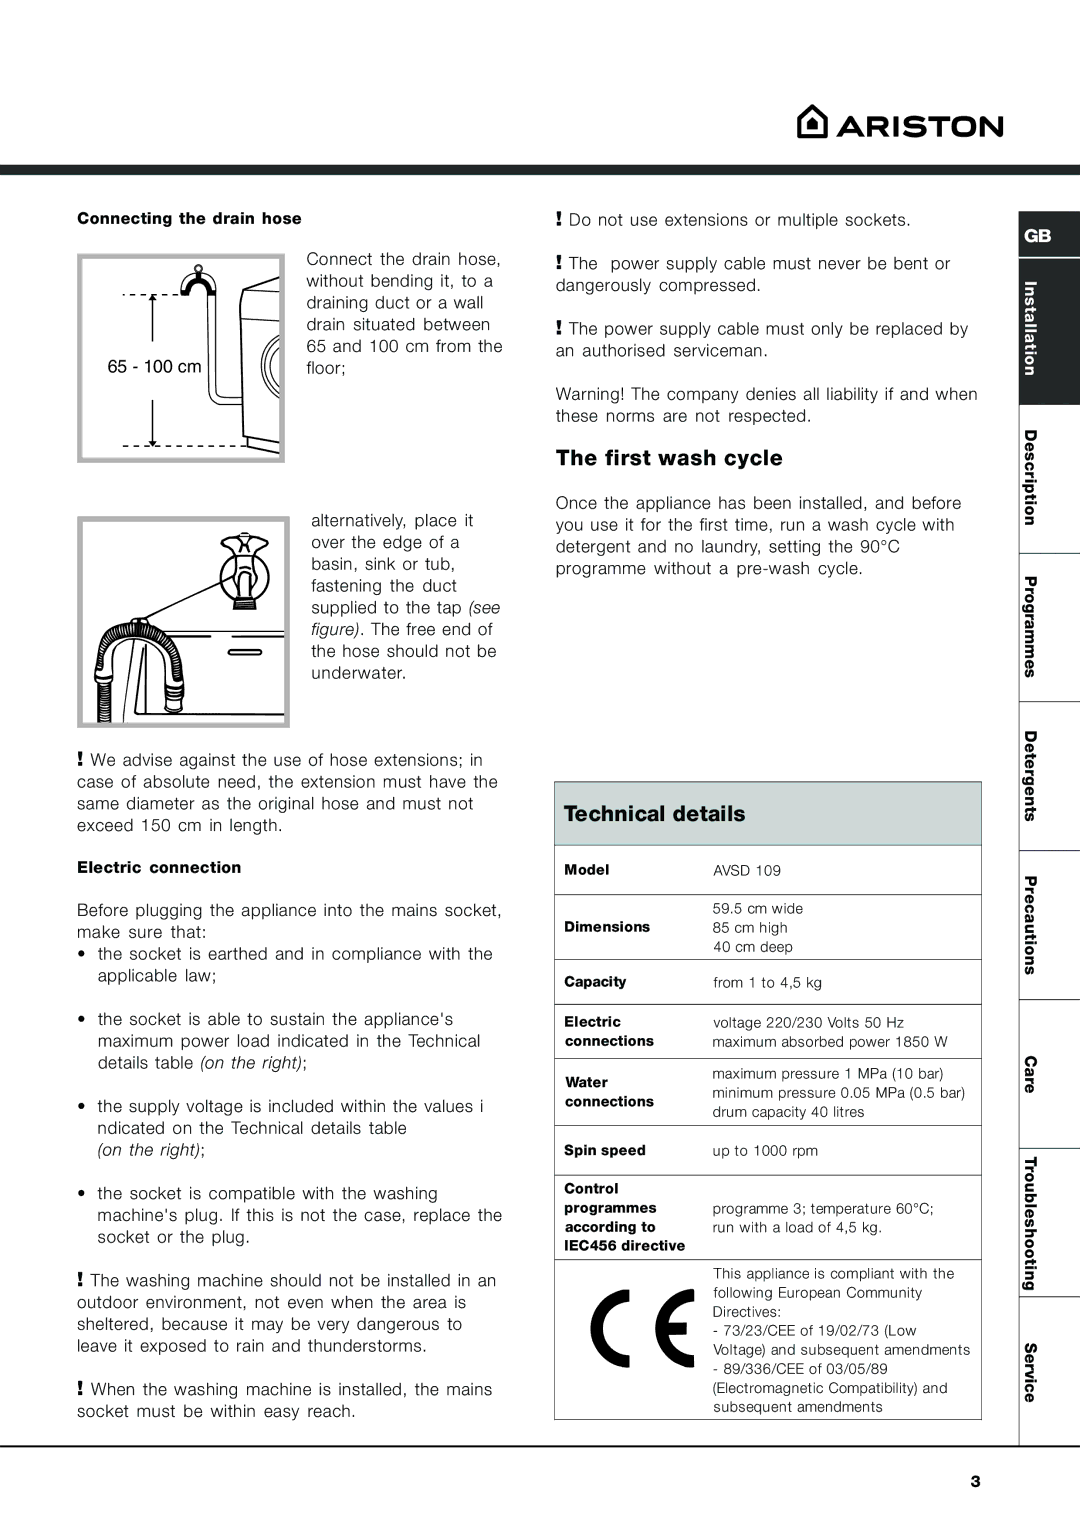 Ariston AVSD 109 manual First wash cycle, Technical details, Electric connection 